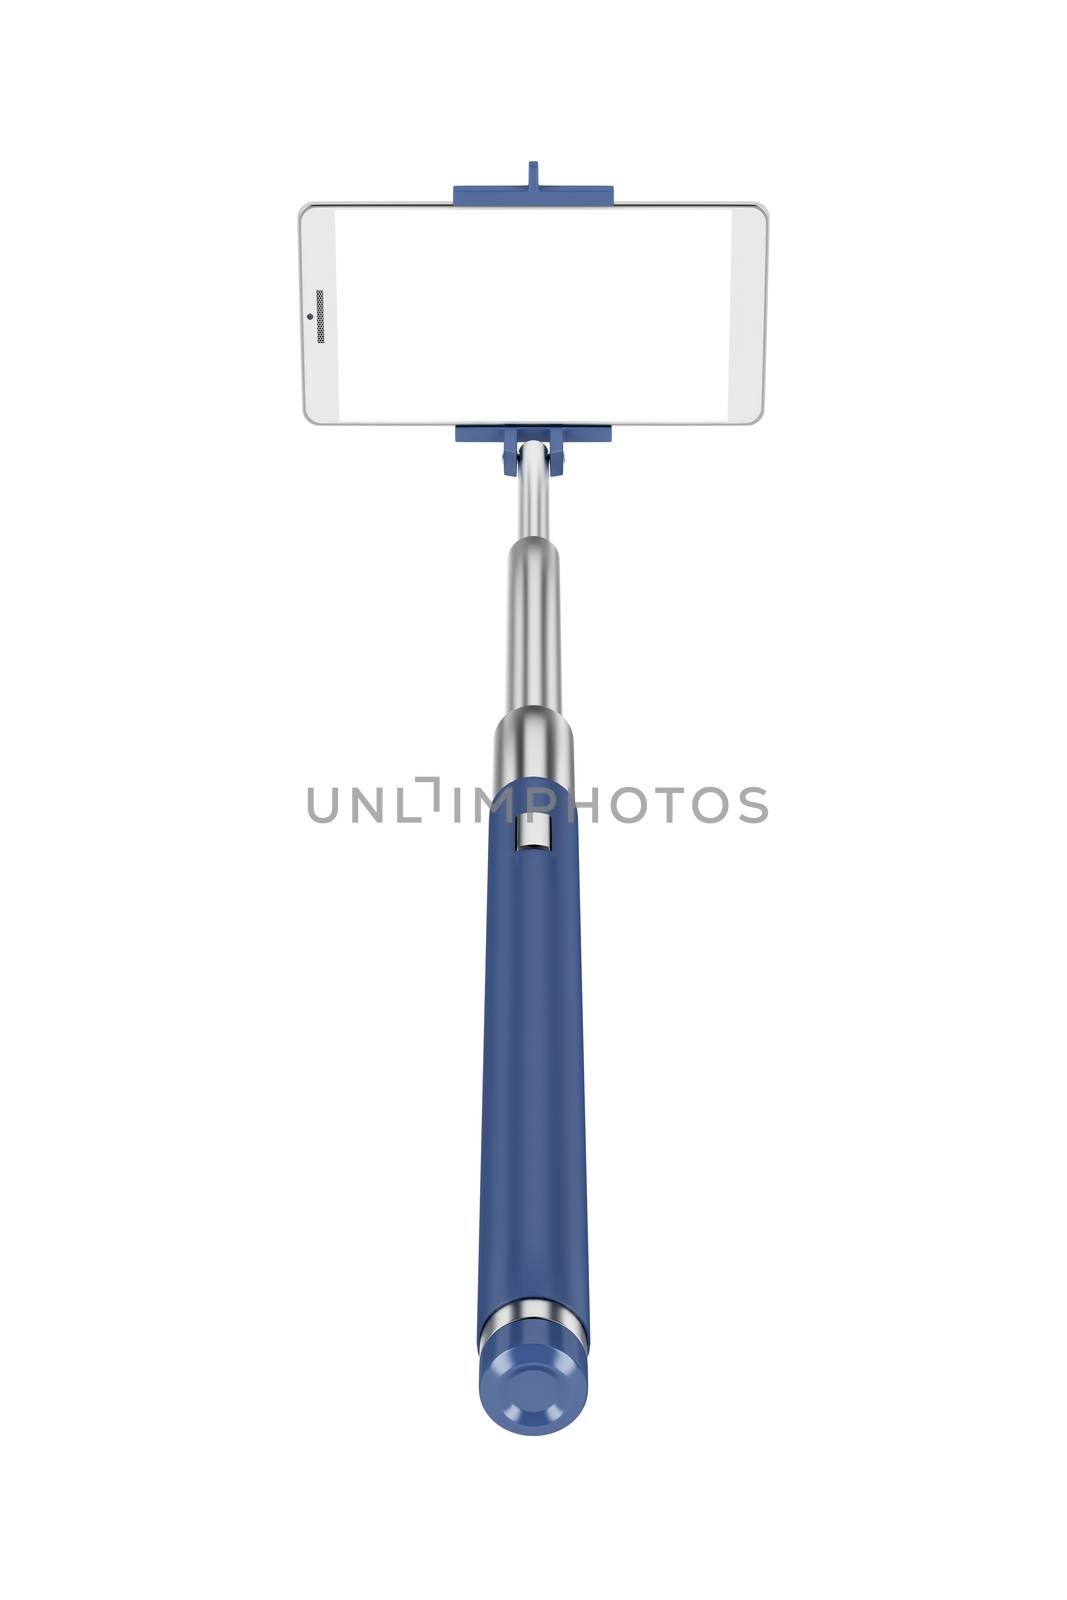 Selfie stick and smart phone by magraphics